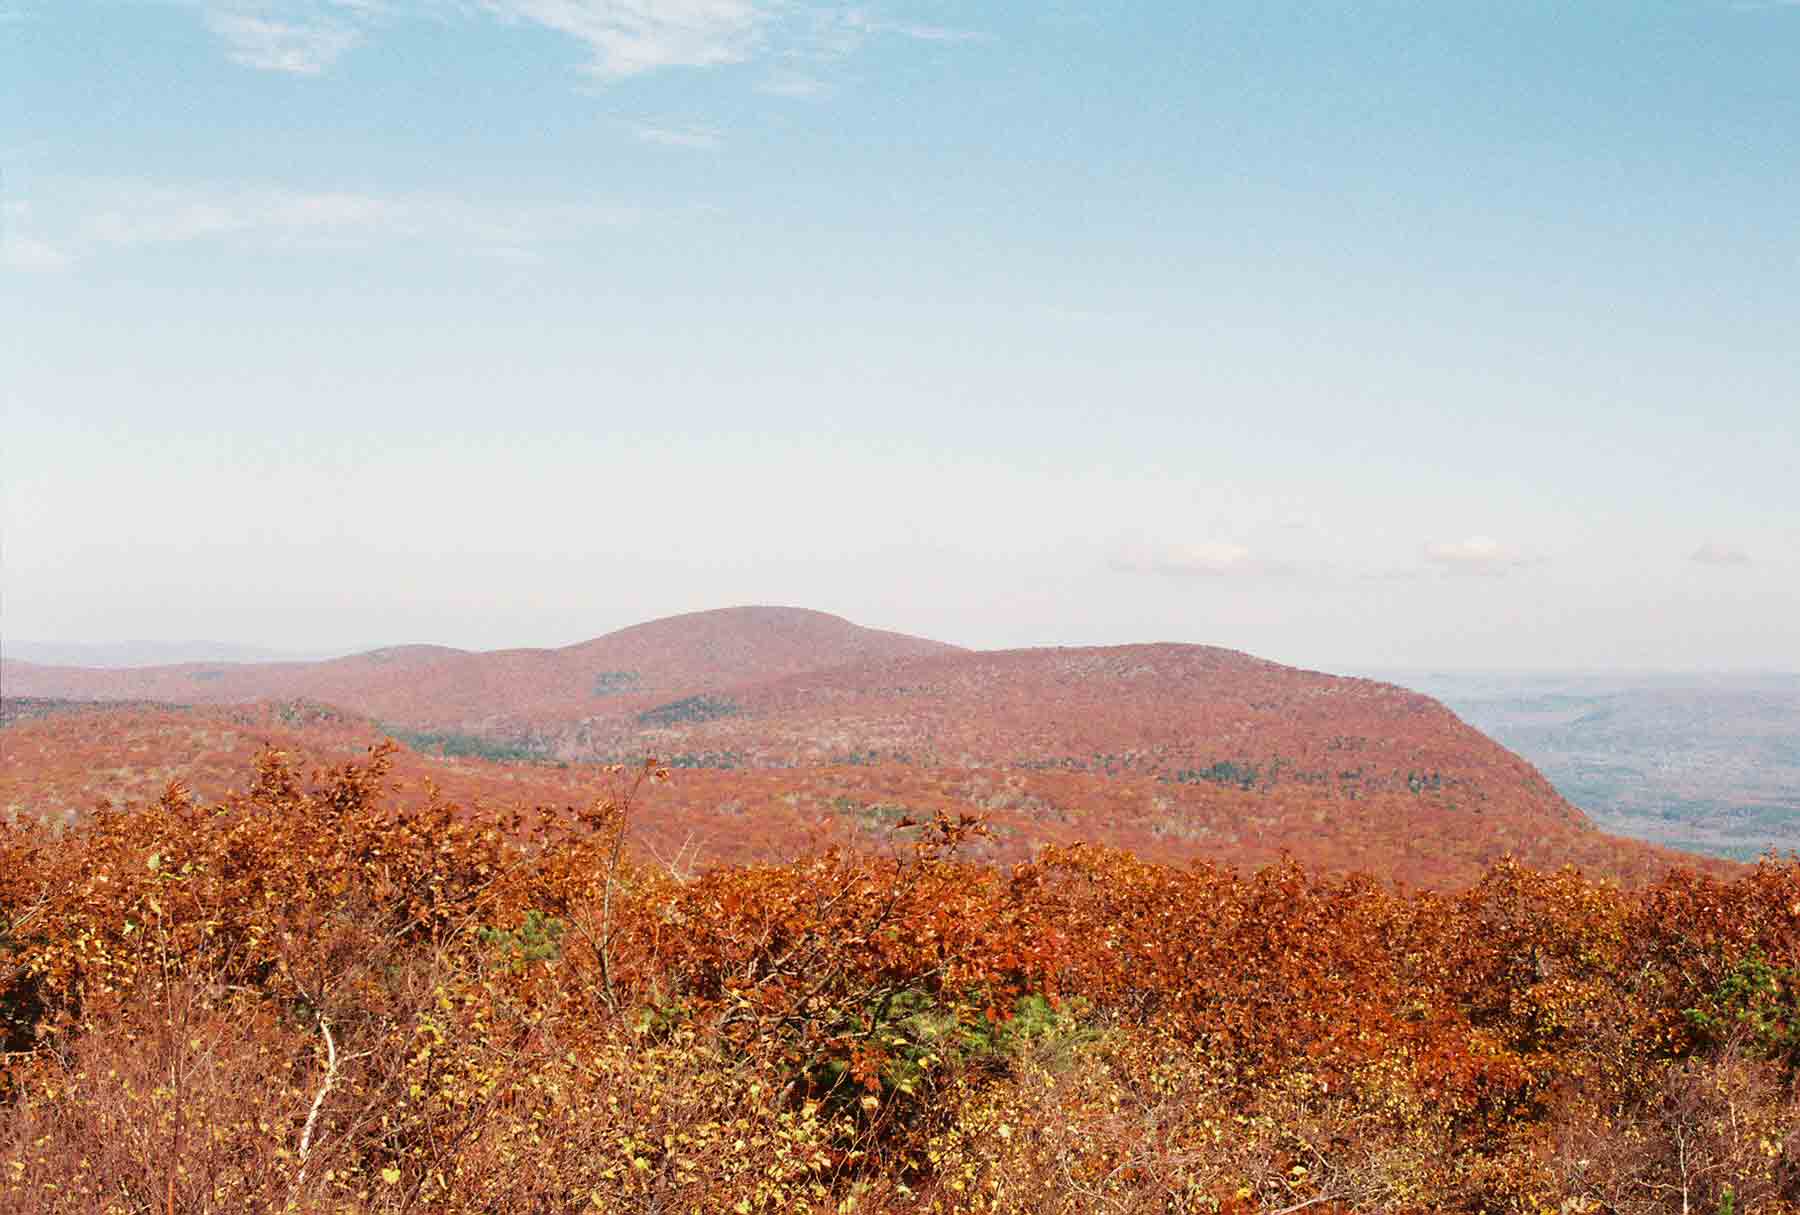 mm 1.4 - Fall View from summit of Bear Mt. looking north towards Mt. Everett and Race Mt. Courtesy dlcul@conncoll.edu